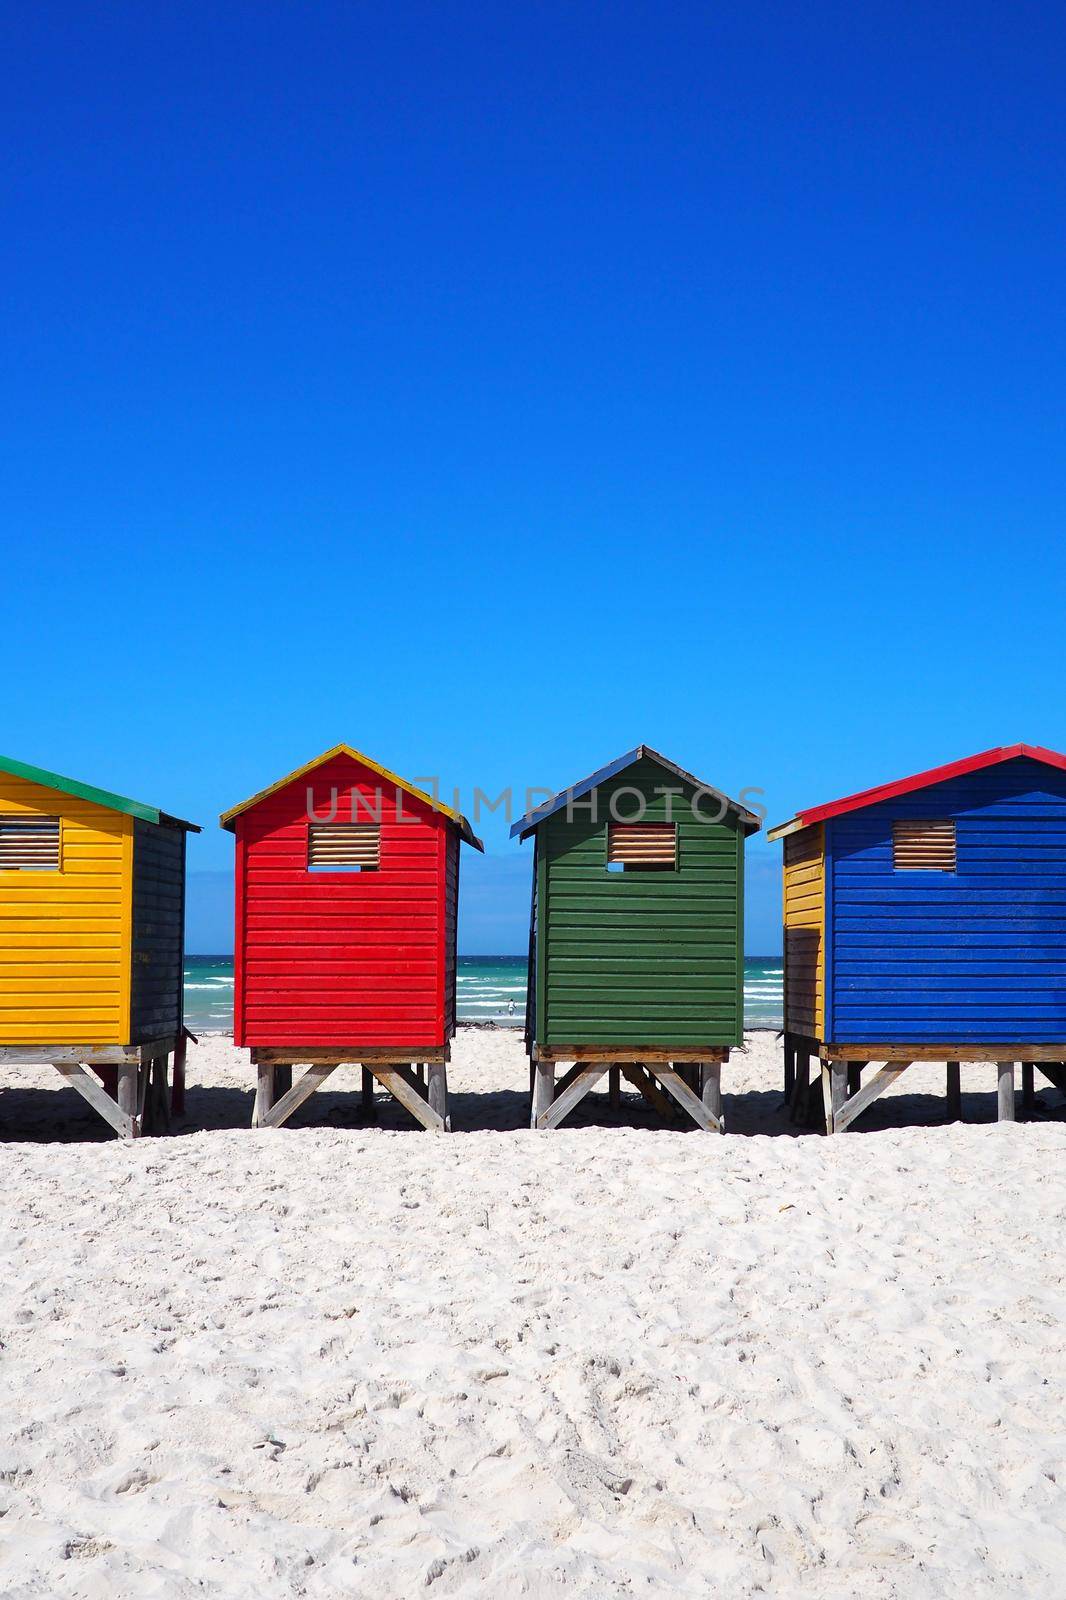 Row of colored beach huts